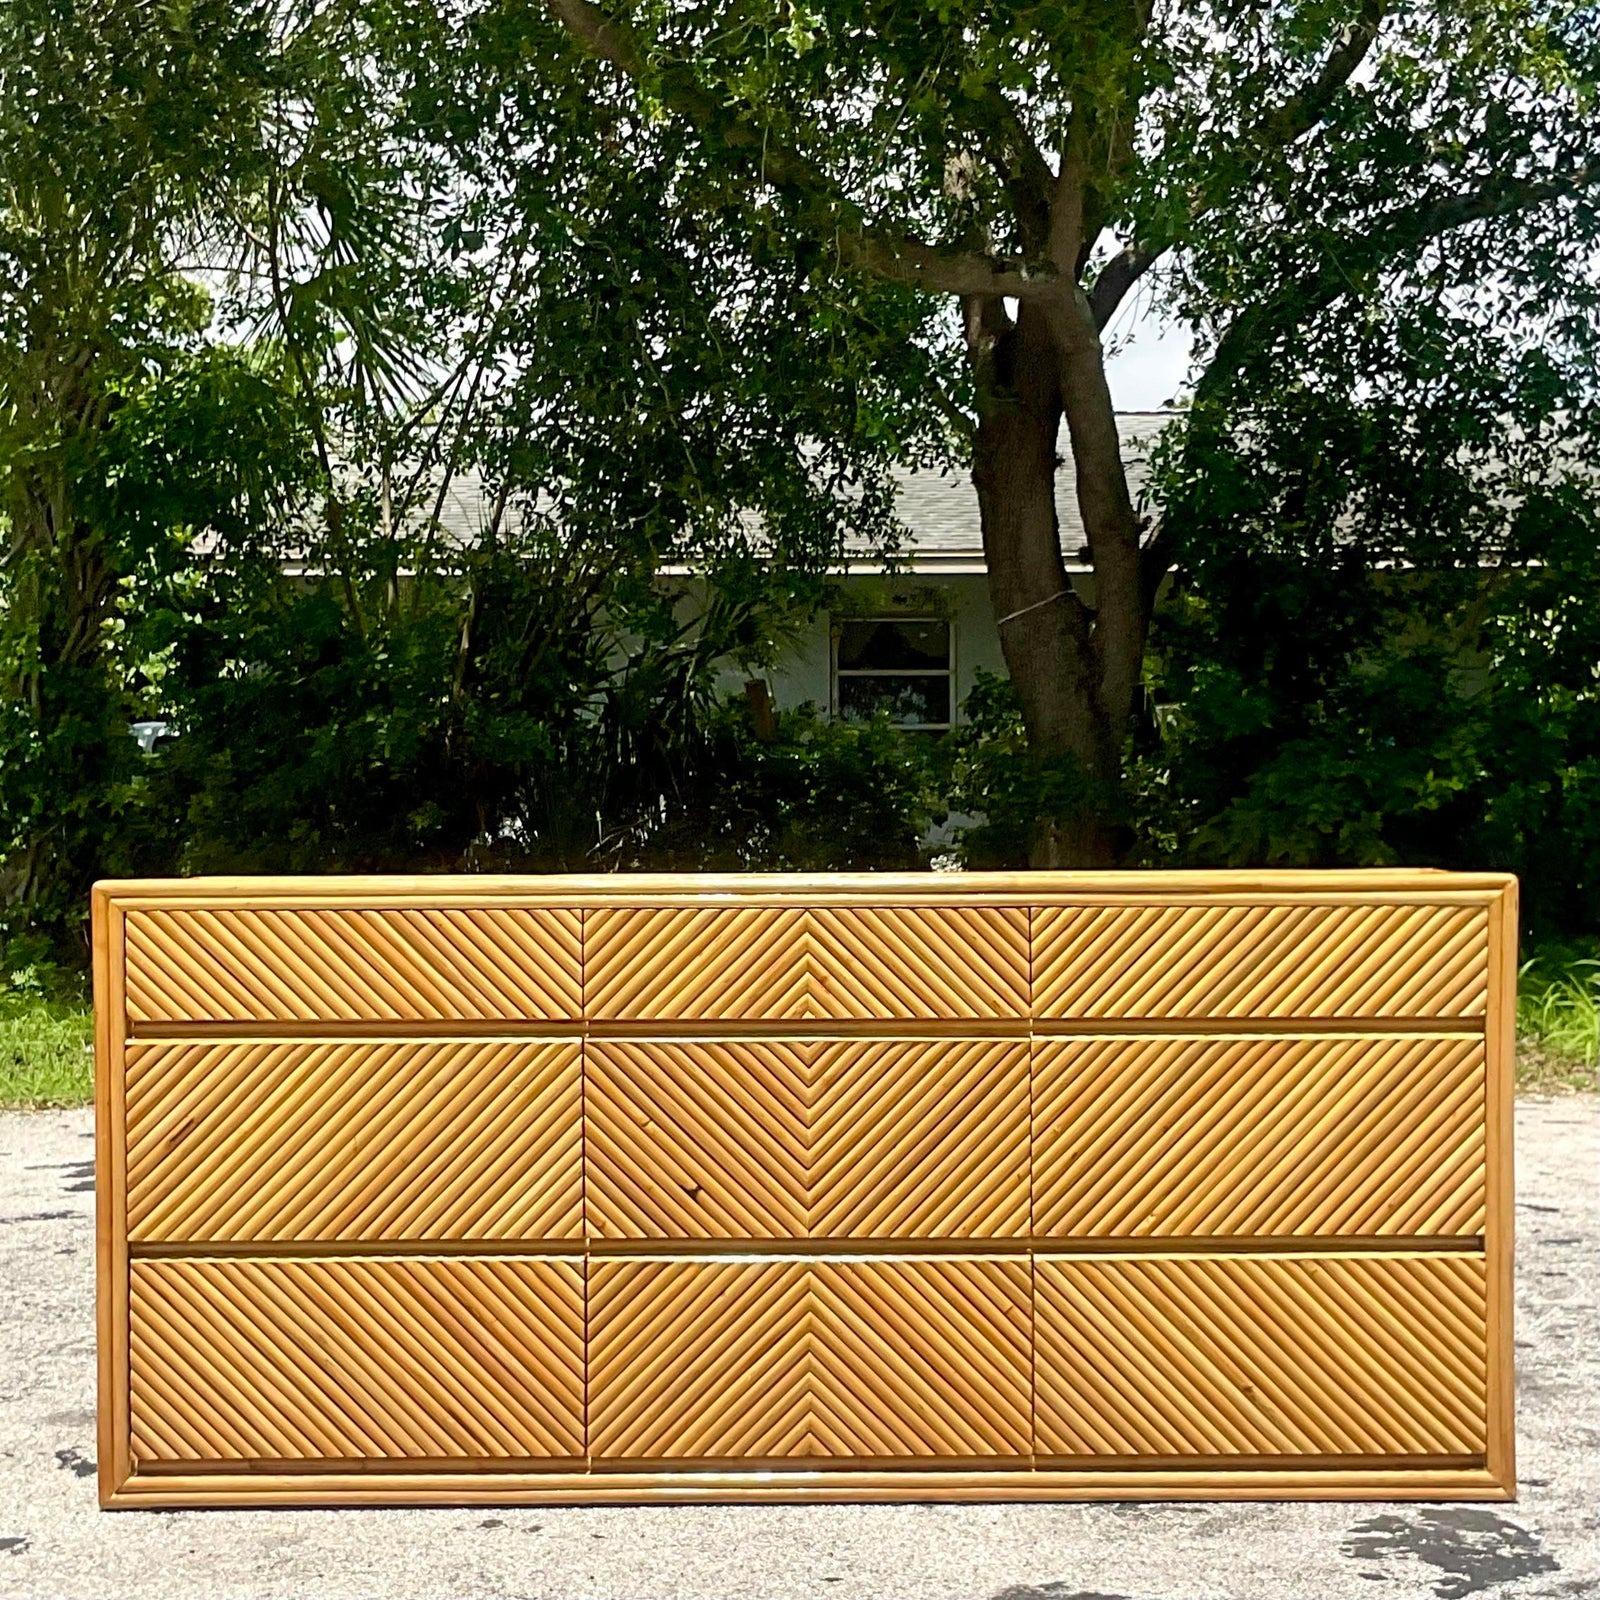 A fabulous vintage Coastal 9 drawer dresser. A chic rattan cabinet in a Chevron design. A real statement piece. Perfect also as a credenza. You decide! Acquired from a Palm Beach estate.